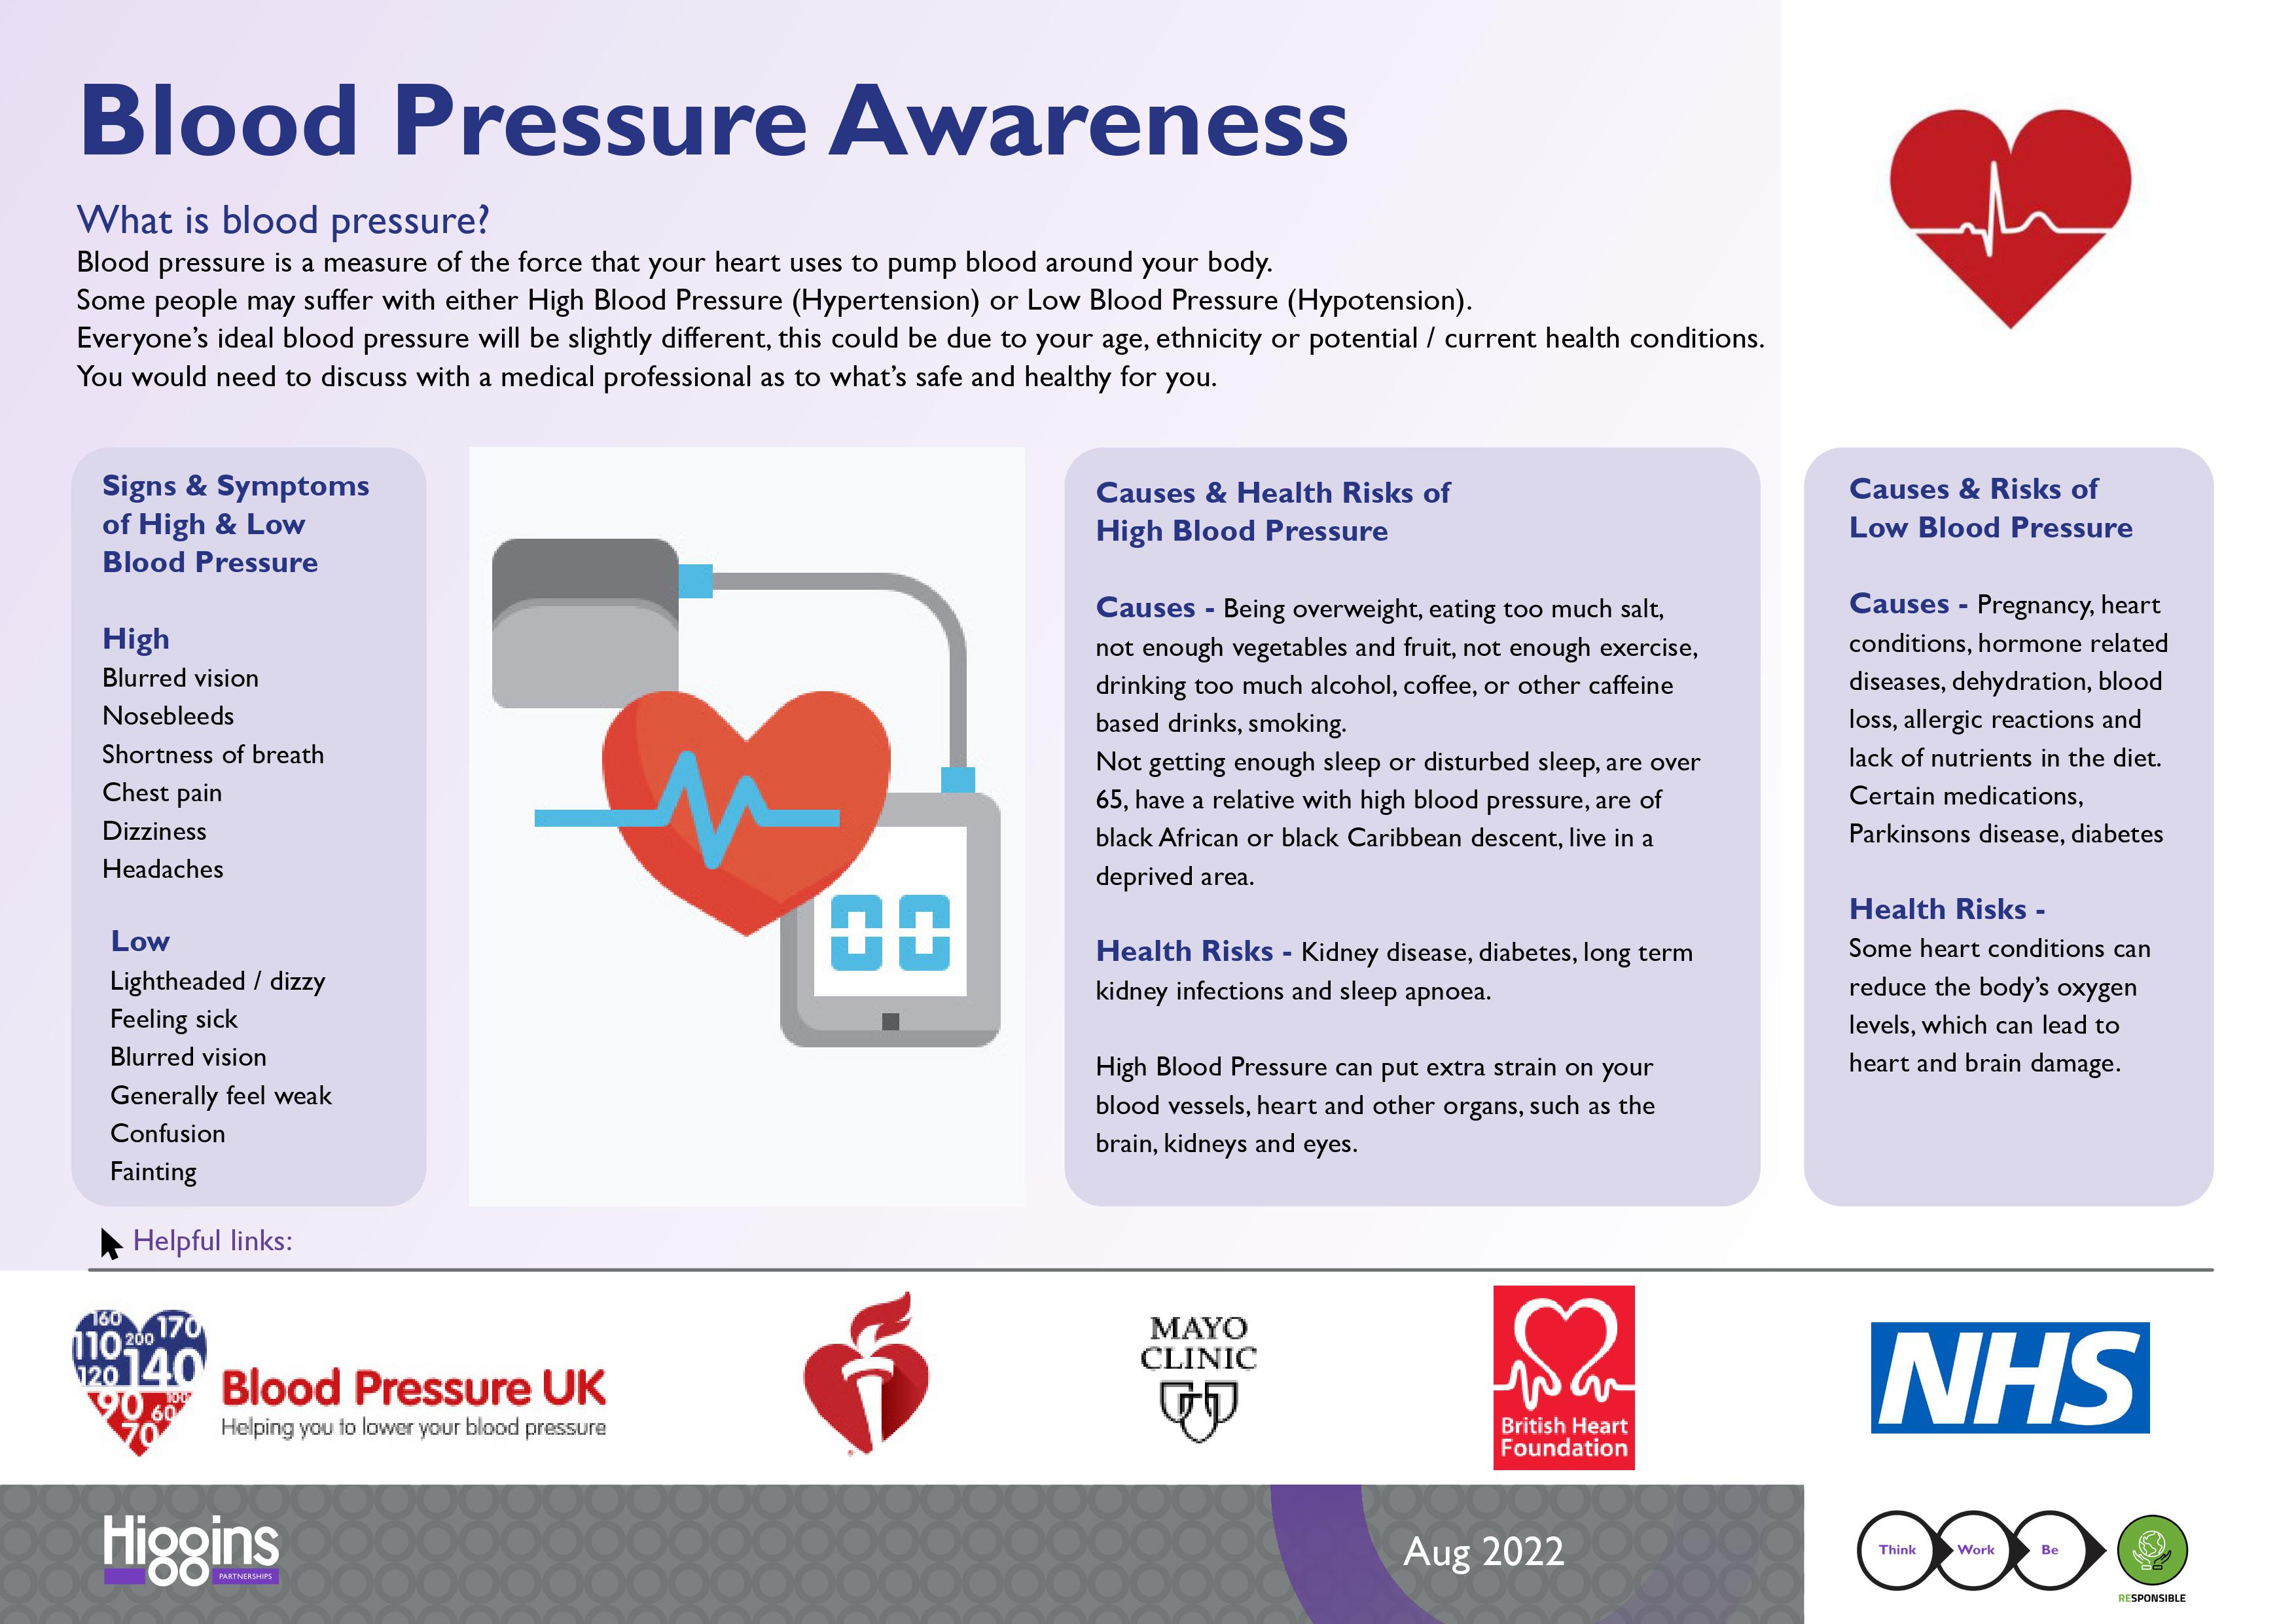 Higgins Partnerships This Month We Are Raising Awareness With Our Team On Site And In The Office About Blood Pressure And The Signs And Symptoms Of High And Low Blood